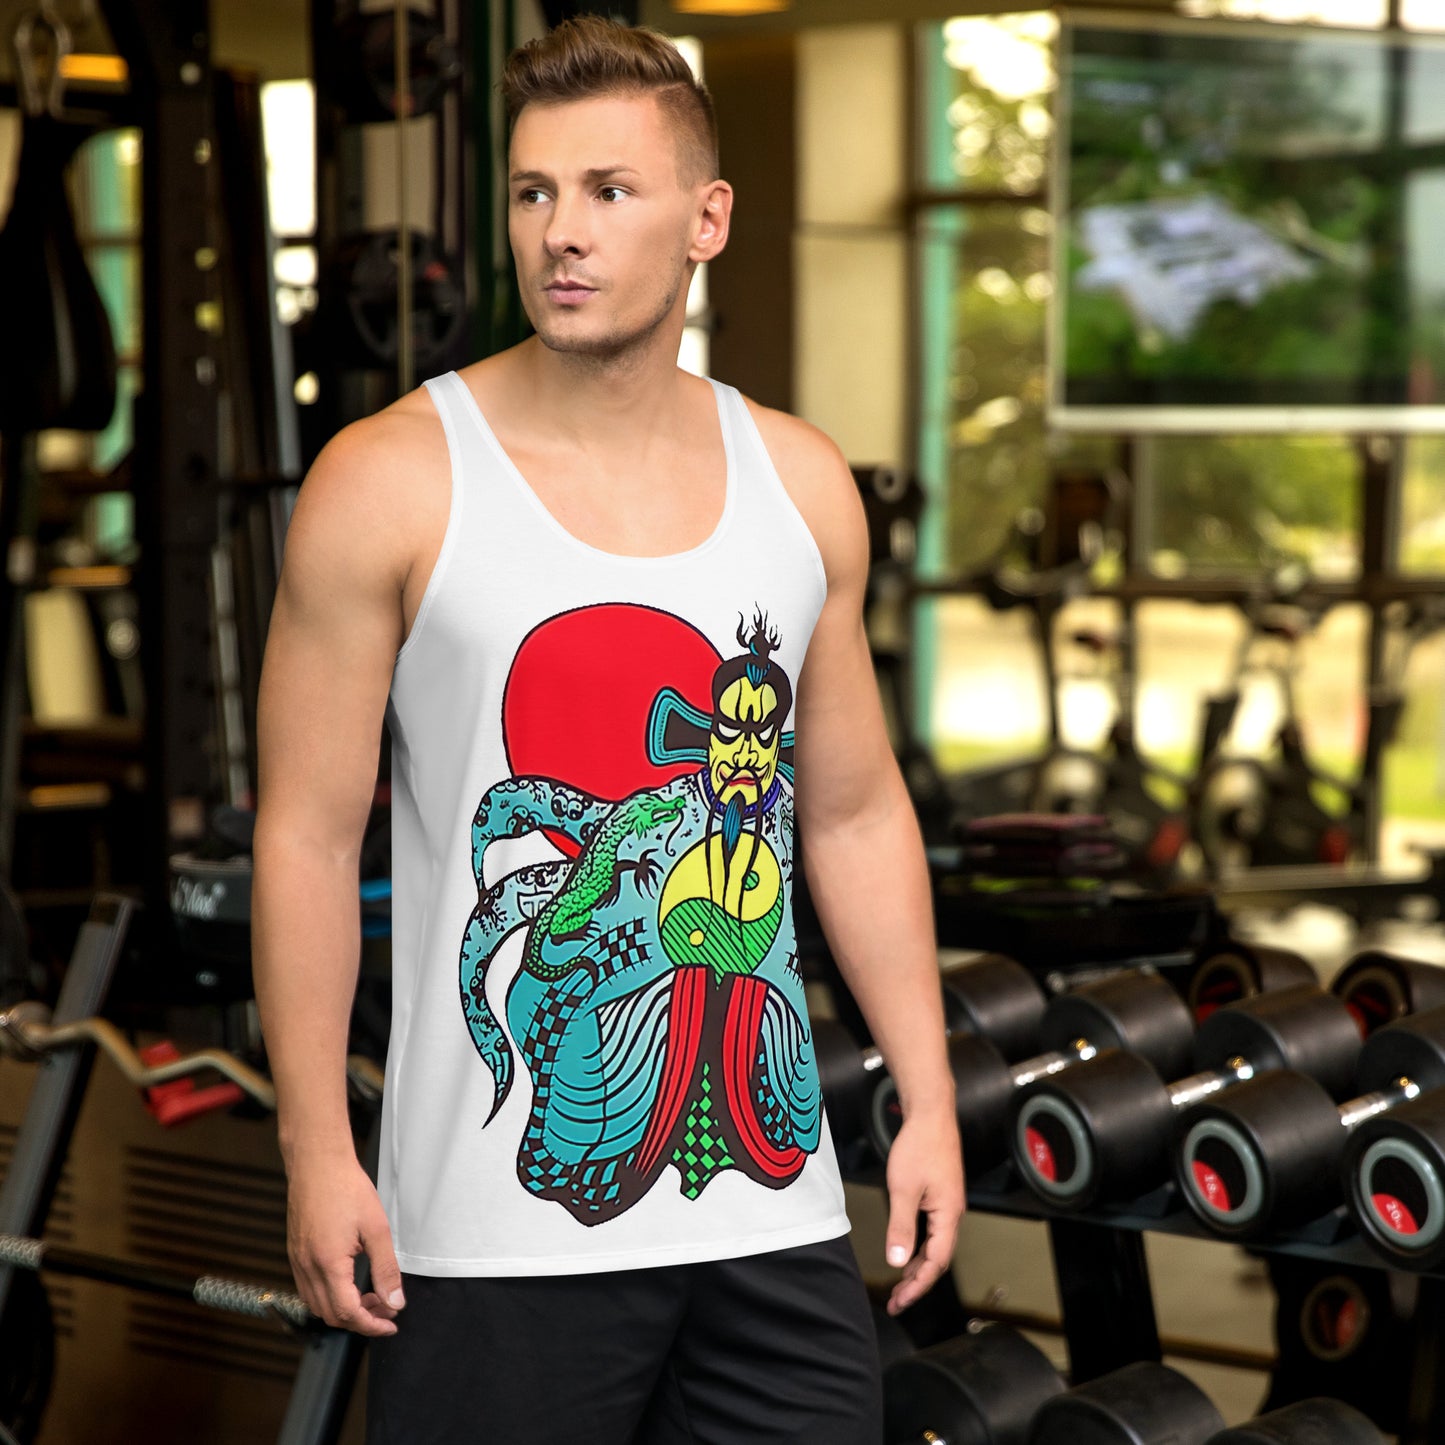 Big Trouble in Little China Tank Top